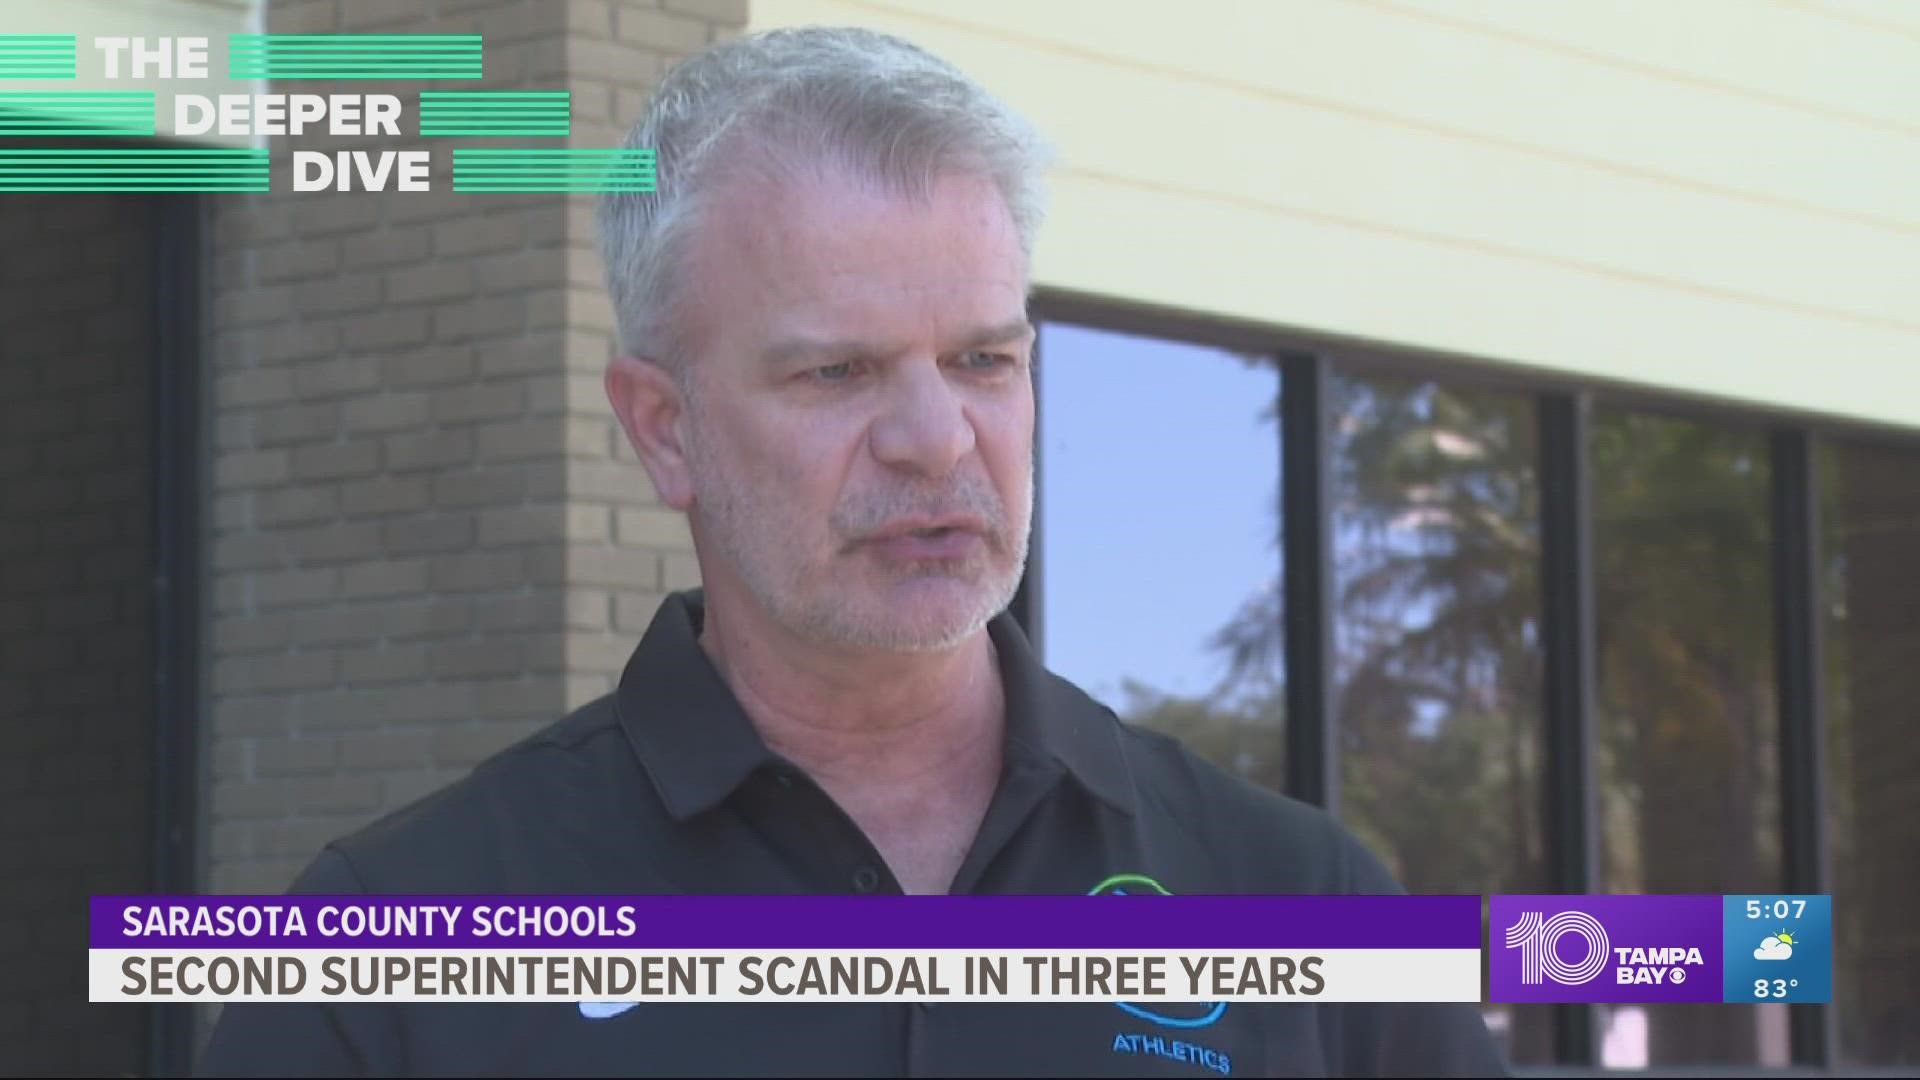 Dr. Brennan Asplen was hired in 2020 to heal a district still reeling from the sexual harassment scandal involving former superintendent Todd Bowden.